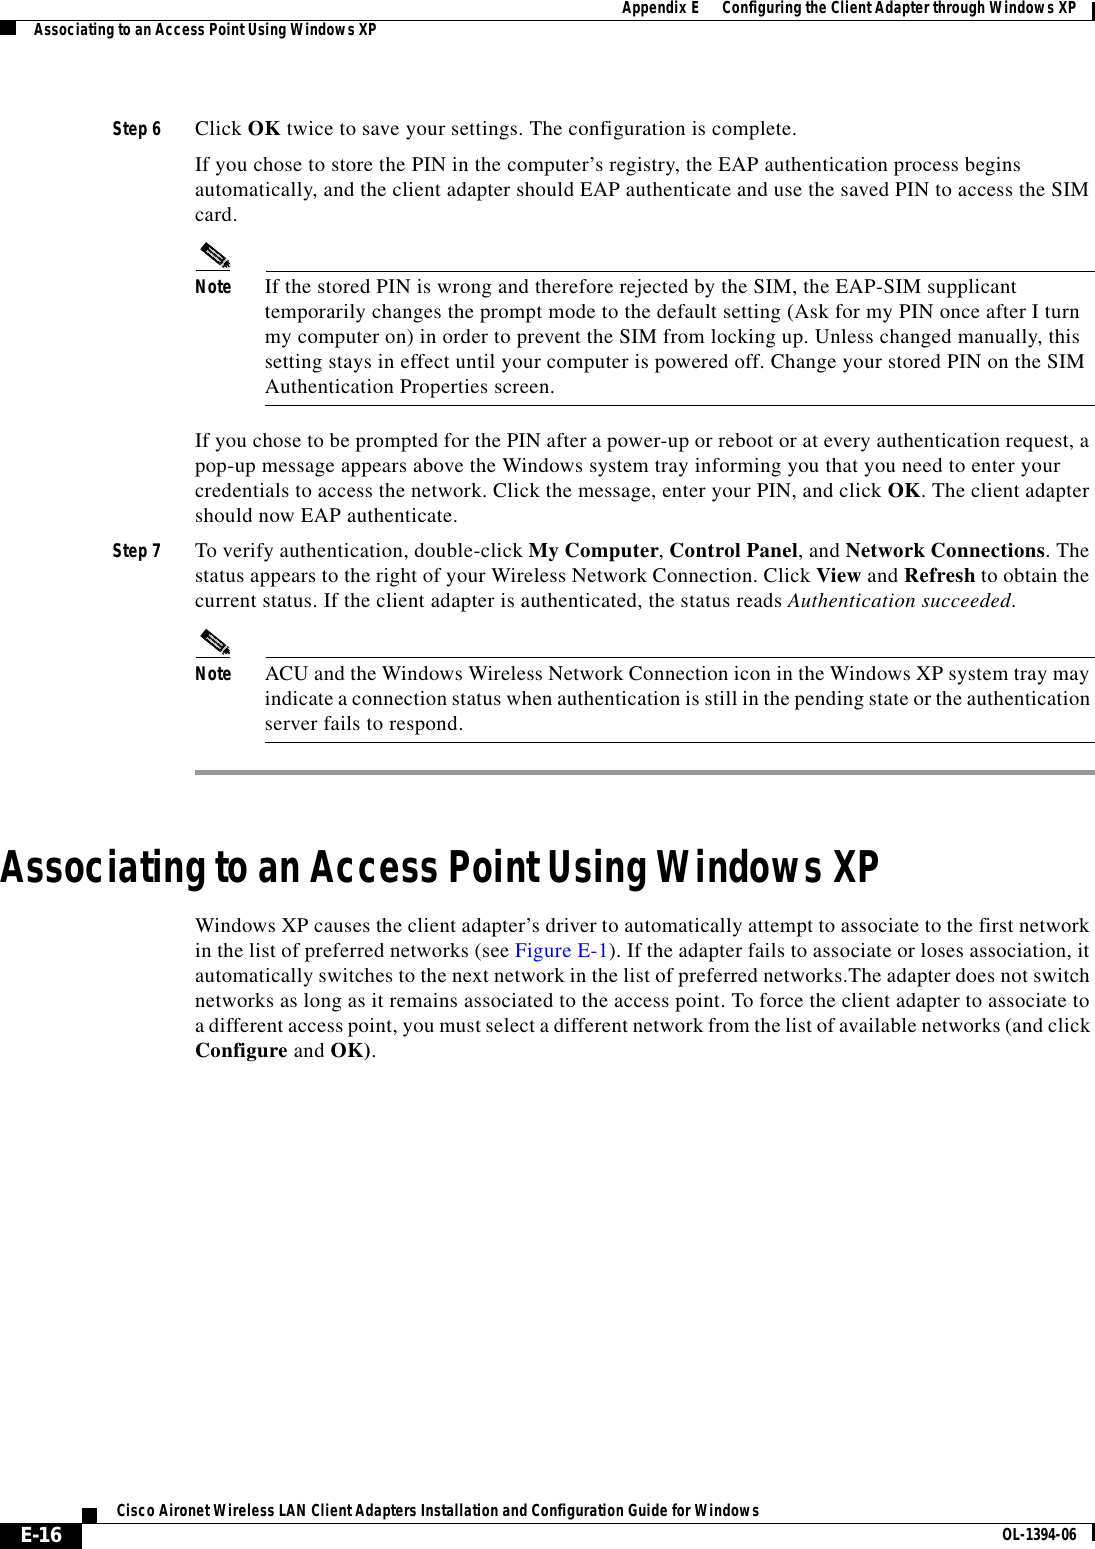 E-16Cisco Aironet Wireless LAN Client Adapters Installation and Configuration Guide for Windows OL-1394-06Appendix E      Configuring the Client Adapter through Windows XPAssociating to an Access Point Using Windows XPStep 6 Click OK twice to save your settings. The configuration is complete.If you chose to store the PIN in the computer’s registry, the EAP authentication process begins automatically, and the client adapter should EAP authenticate and use the saved PIN to access the SIM card.Note If the stored PIN is wrong and therefore rejected by the SIM, the EAP-SIM supplicant temporarily changes the prompt mode to the default setting (Ask for my PIN once after I turn my computer on) in order to prevent the SIM from locking up. Unless changed manually, this setting stays in effect until your computer is powered off. Change your stored PIN on the SIM Authentication Properties screen.If you chose to be prompted for the PIN after a power-up or reboot or at every authentication request, a pop-up message appears above the Windows system tray informing you that you need to enter your credentials to access the network. Click the message, enter your PIN, and click OK. The client adapter should now EAP authenticate.Step 7 To verify authentication, double-click My Computer,Control Panel, and Network Connections. The status appears to the right of your Wireless Network Connection. Click View and Refresh to obtain the current status. If the client adapter is authenticated, the status reads Authentication succeeded.Note ACU and the Windows Wireless Network Connection icon in the Windows XP system tray may indicate a connection status when authentication is still in the pending state or the authentication server fails to respond.Associating to an Access Point Using Windows XPWindows XP causes the client adapter’s driver to automatically attempt to associate to the first network in the list of preferred networks (see Figure E-1). If the adapter fails to associate or loses association, it automatically switches to the next network in the list of preferred networks.The adapter does not switch networks as long as it remains associated to the access point. To force the client adapter to associate to a different access point, you must select a different network from the list of available networks (and click Configure and OK).